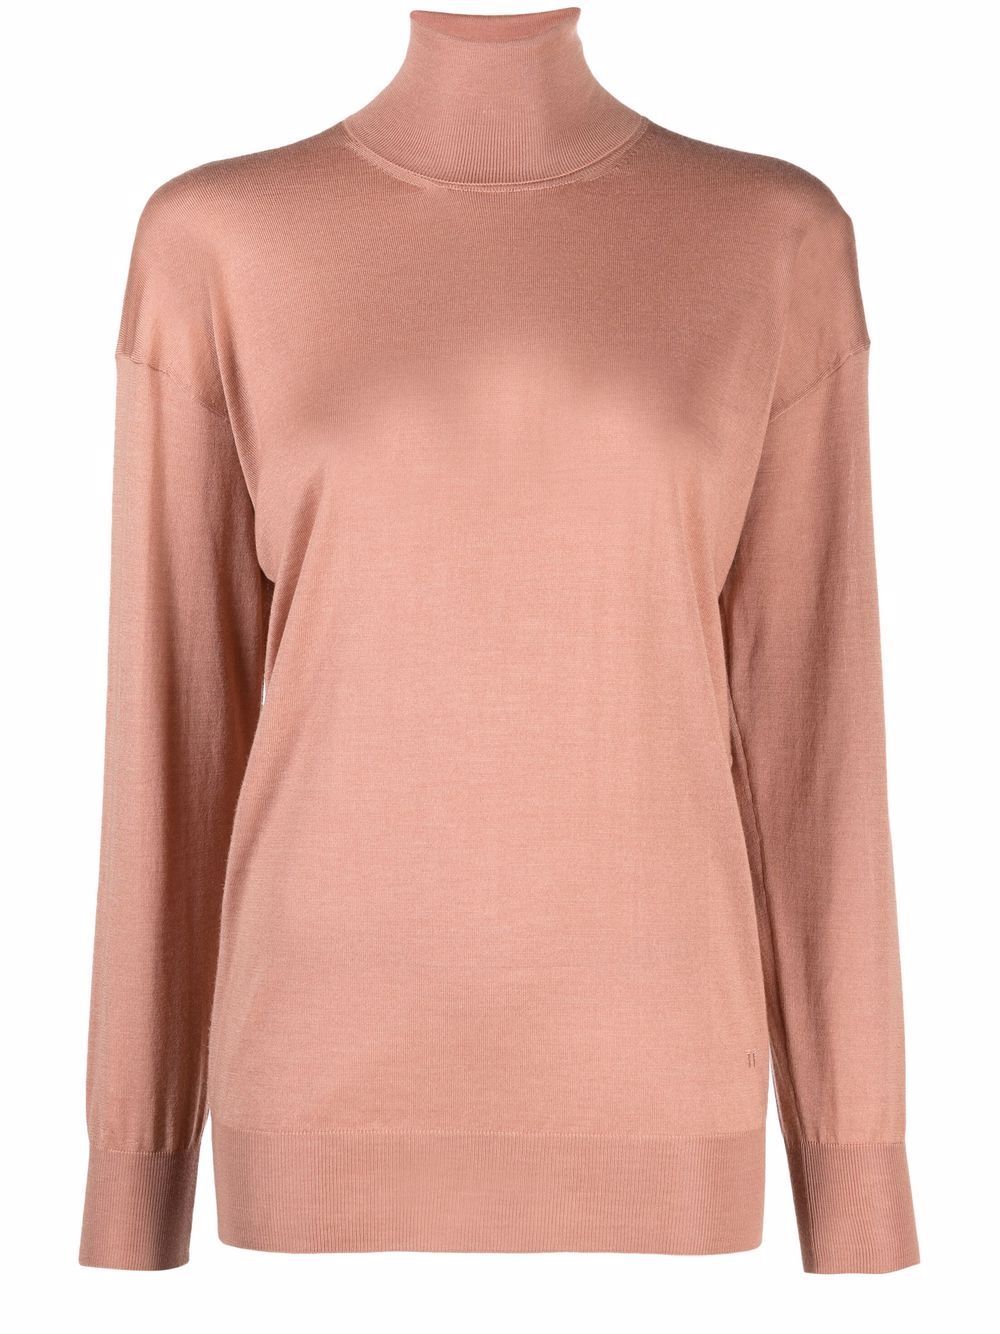 TOM FORD Beige Ribbed Turtleneck Sweater for Women - FW21 Collection